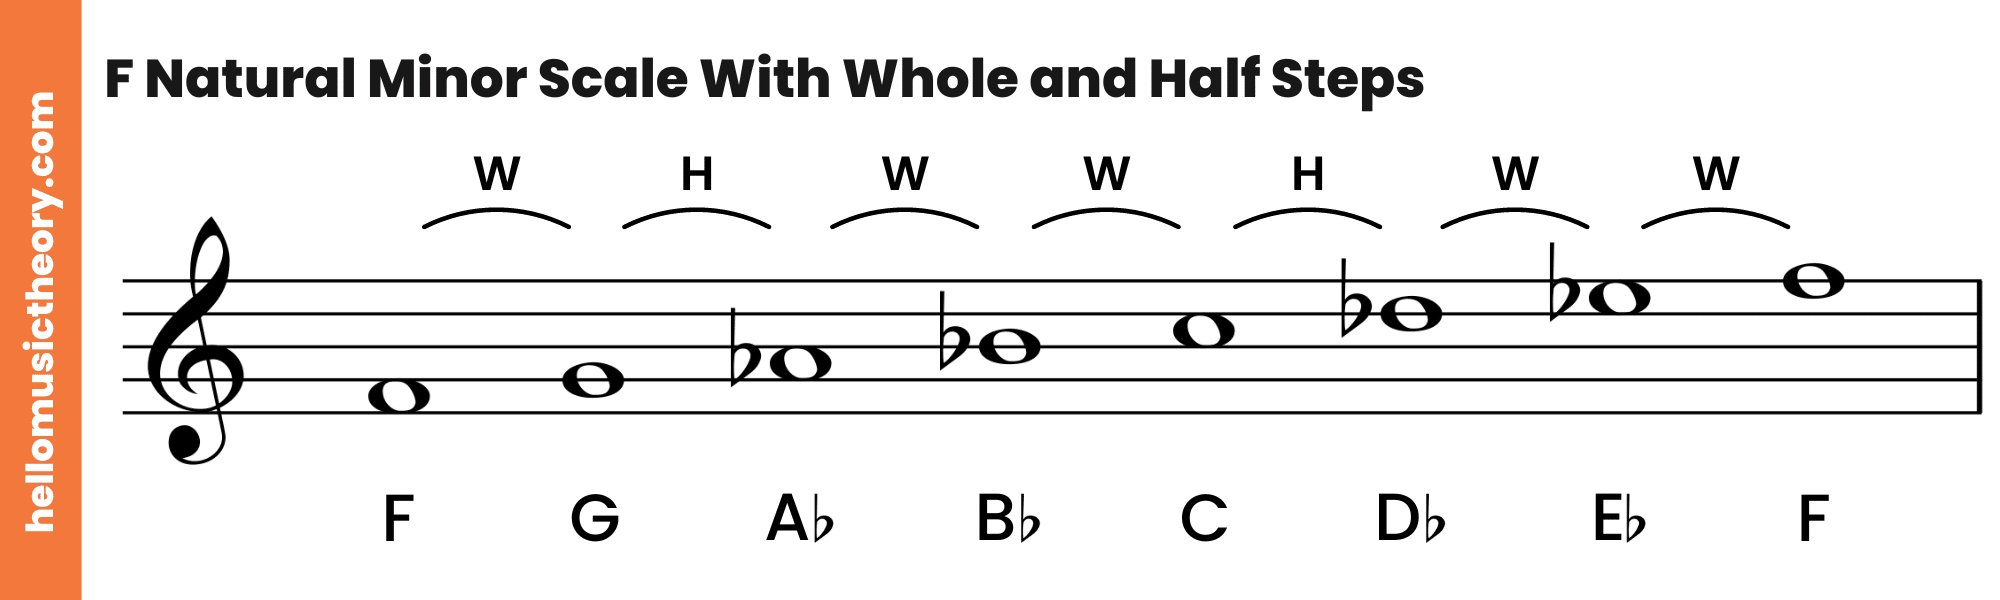 F Natural Minor Scale Treble Clef Ascending With Whole and Half Steps